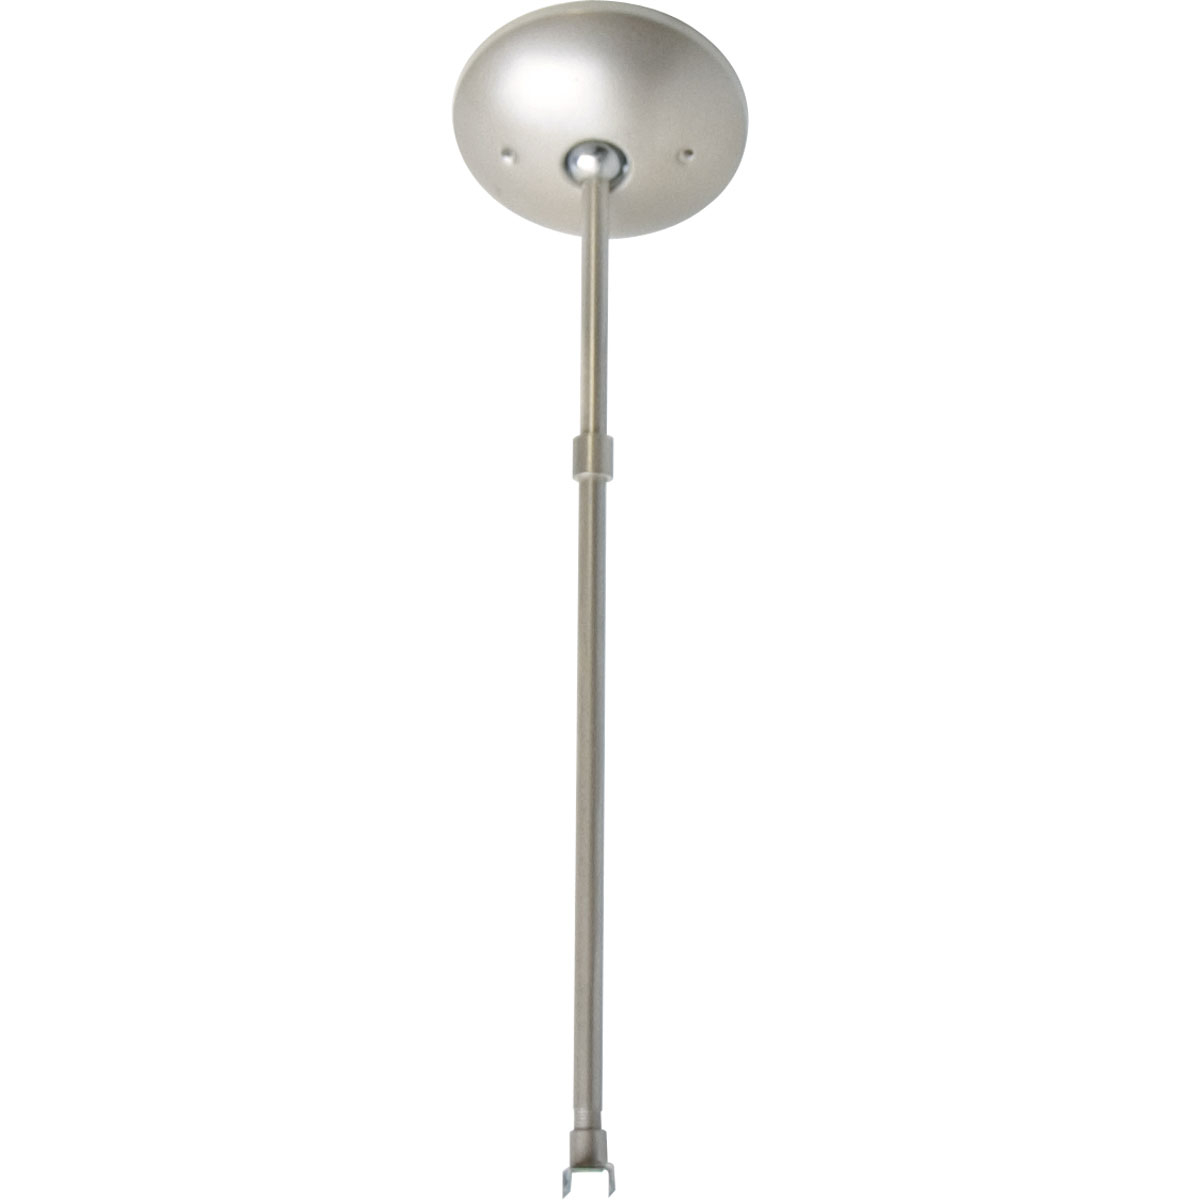 Pendant kit less power feed includes outlet box cover. Includes 6 in and 12 in stem lengths, and all necessary mounting hardware. Brushed Nickel finish.